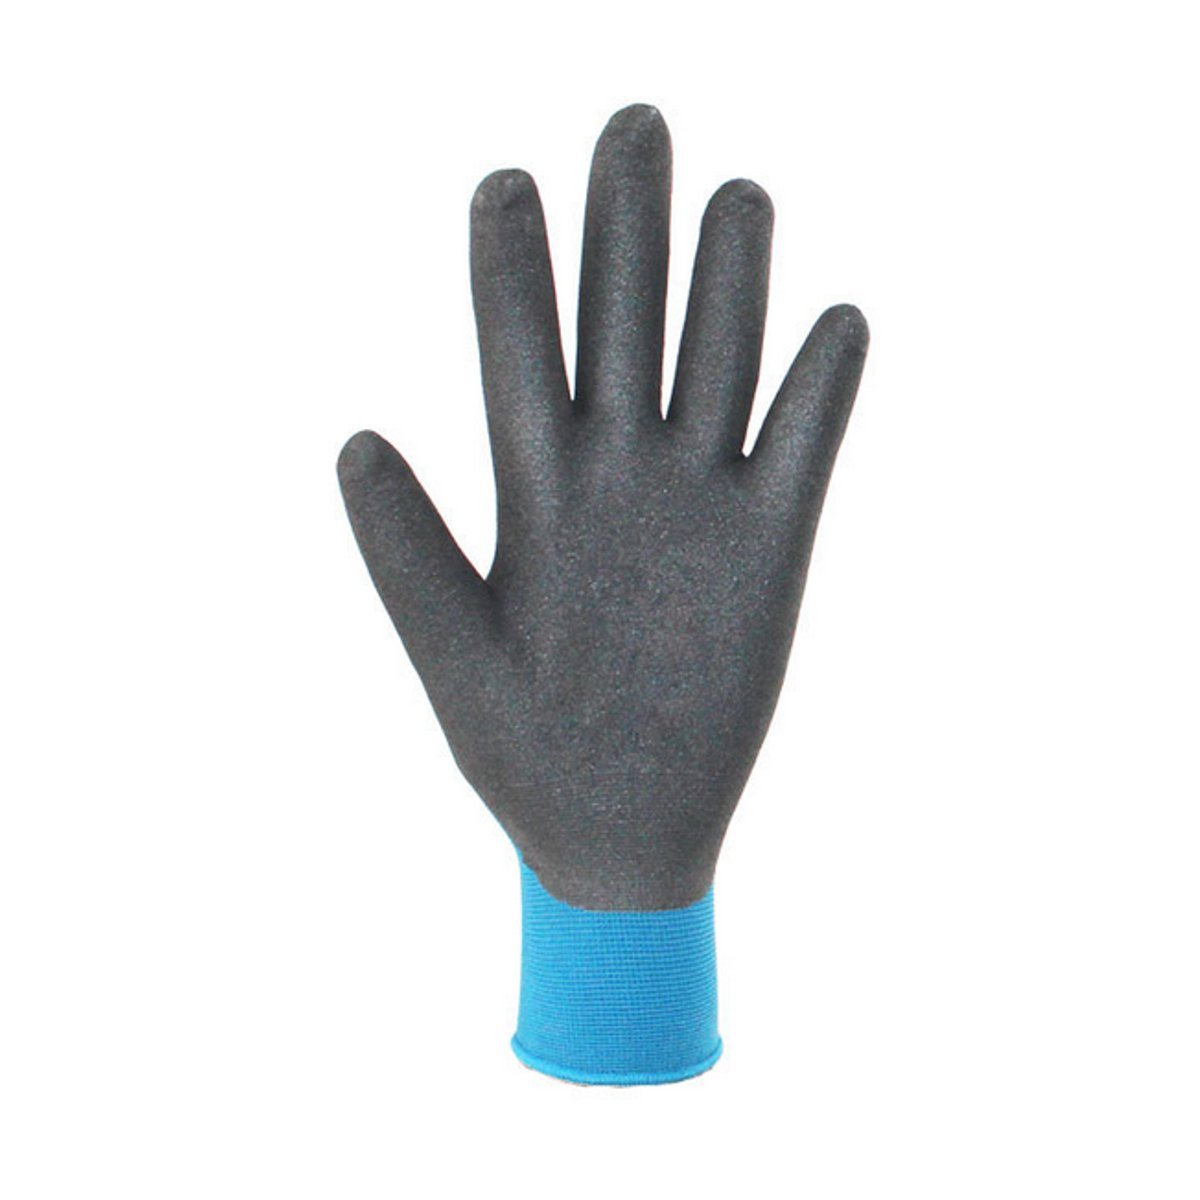 Garden Housework Gloves Waterproof Durable Nylon with Nitrile Sandy Coated Protection Safty Glove